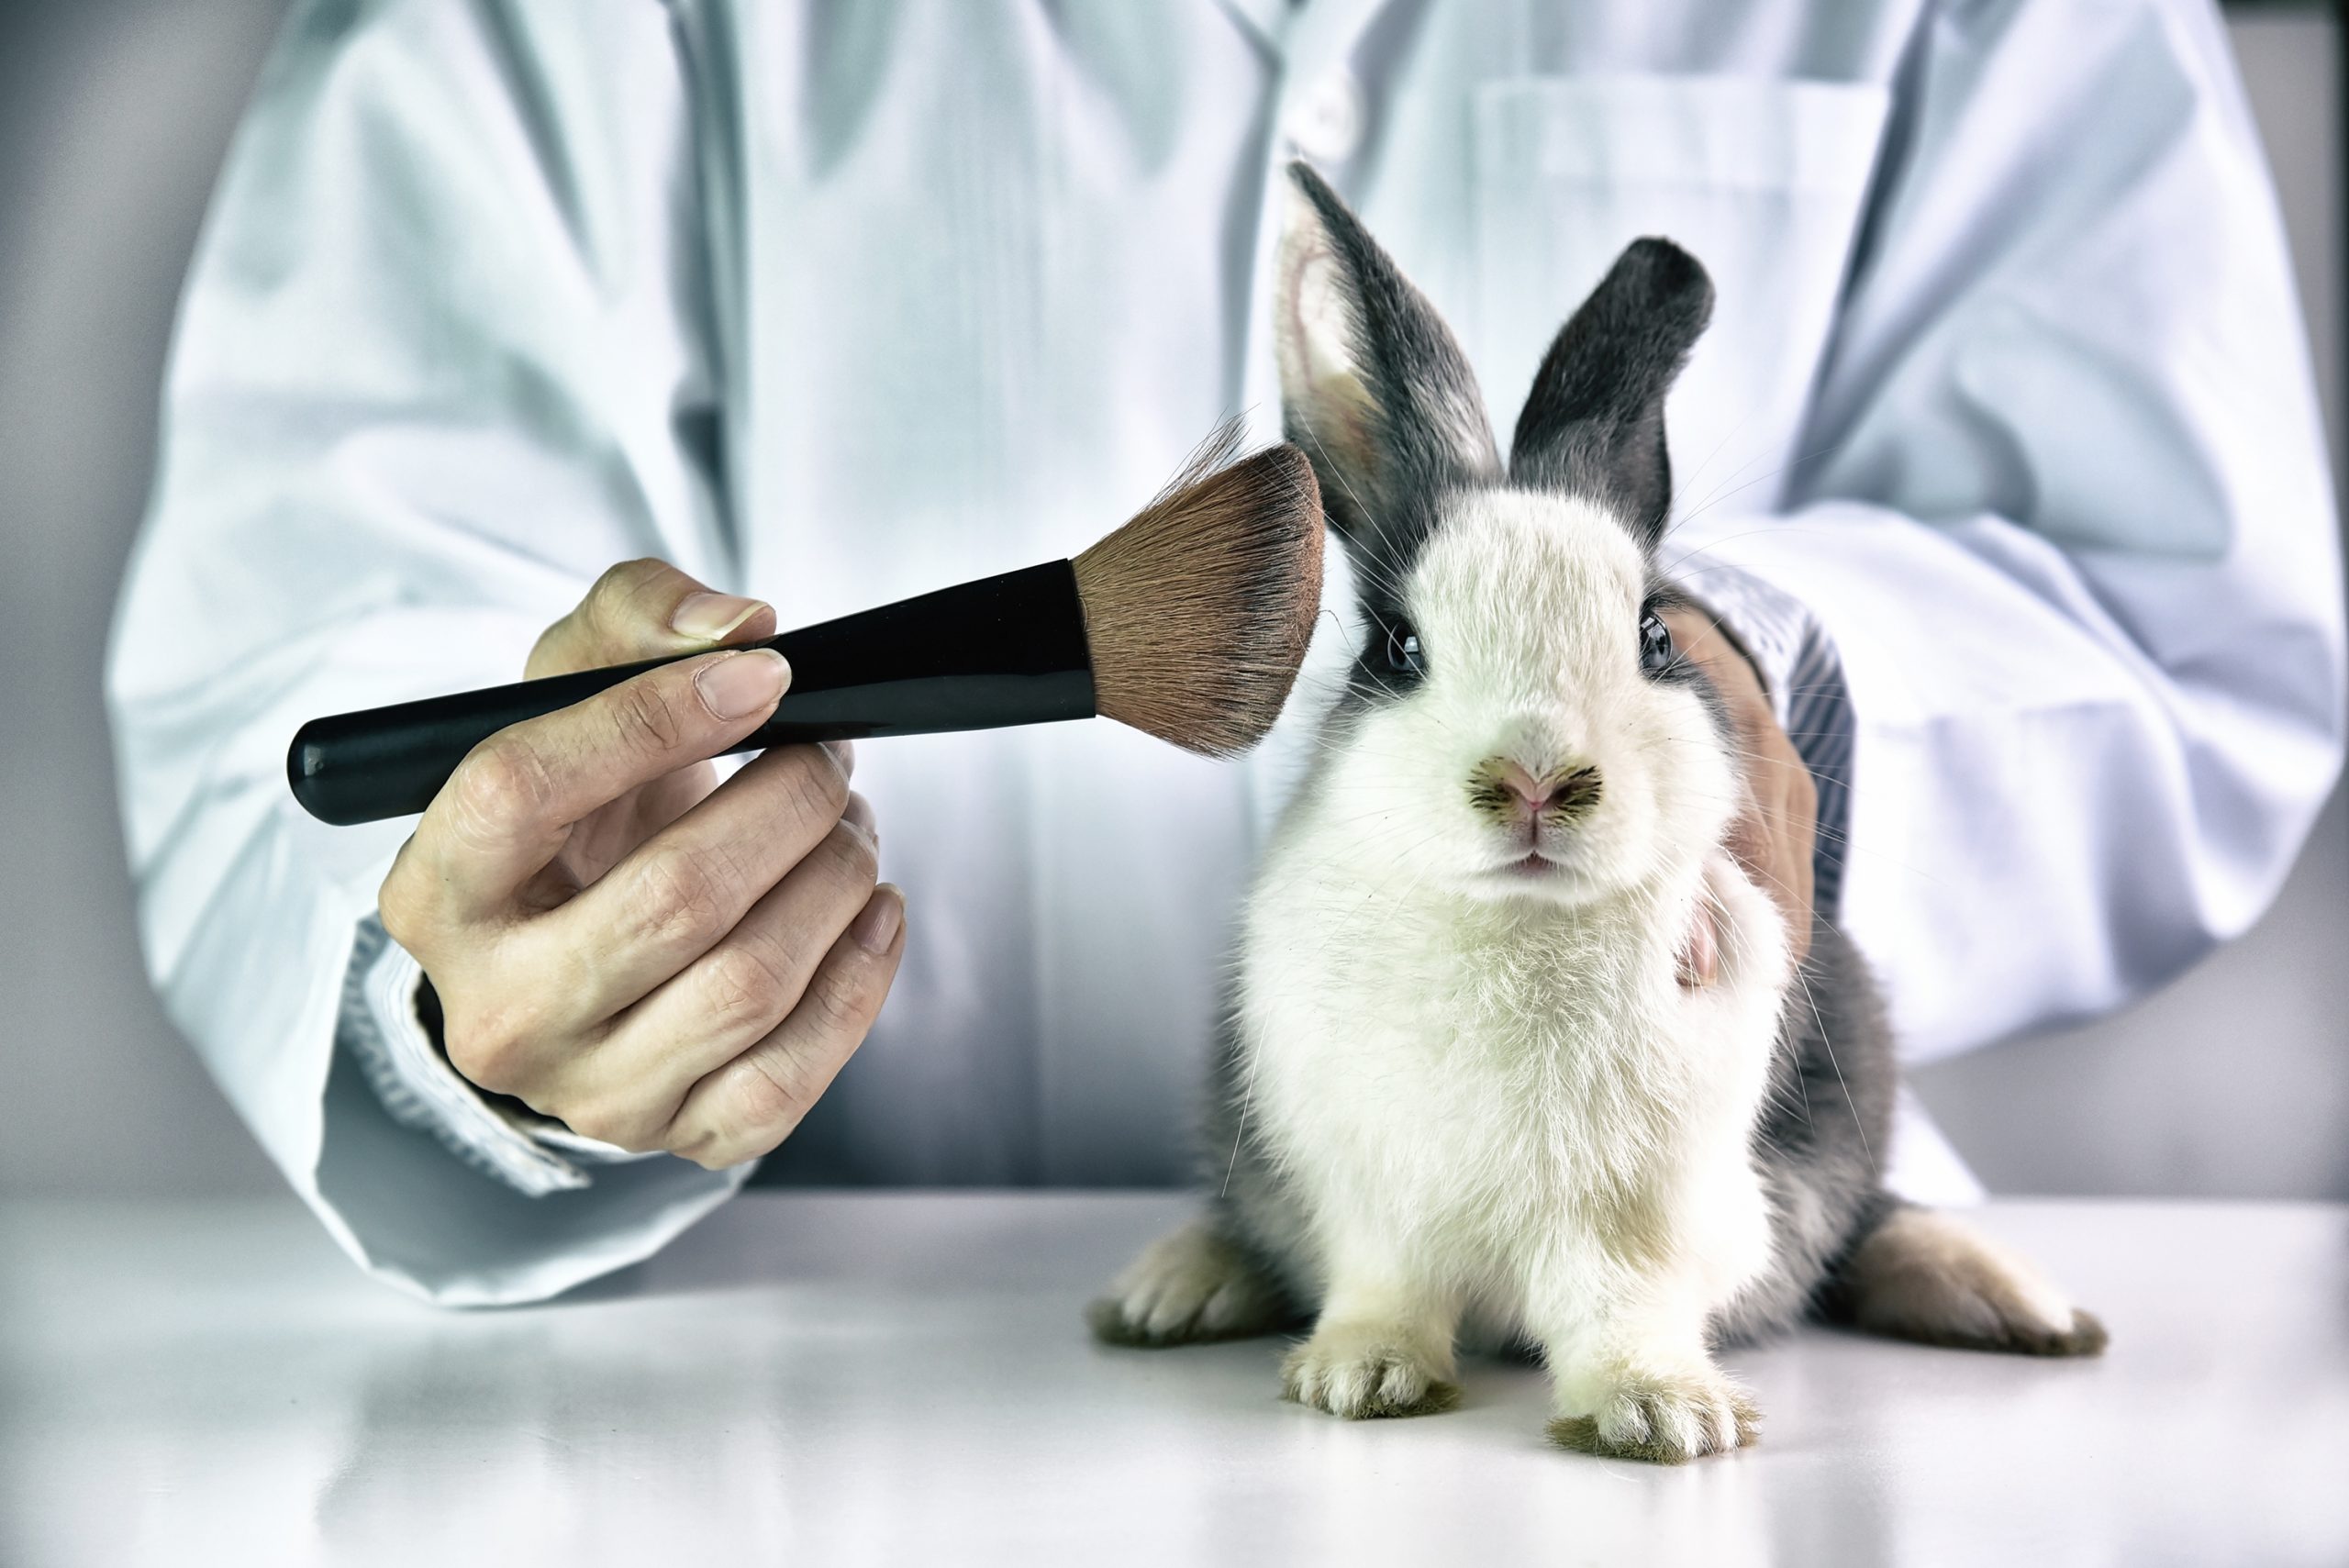 Scientist holding a makeup brush next to a bunny